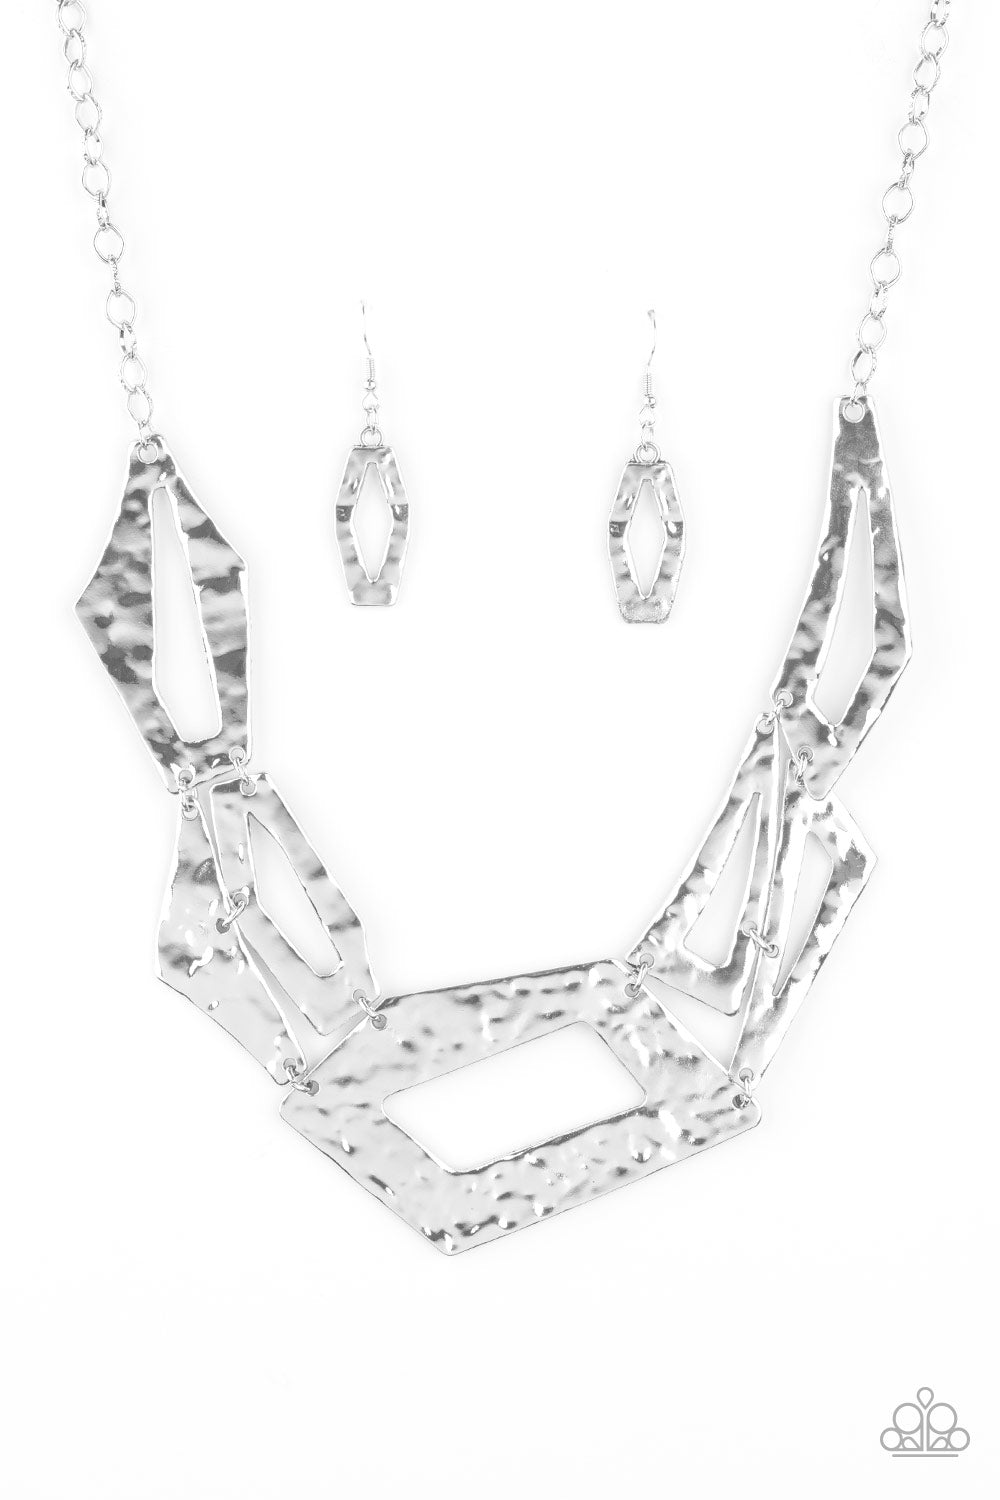 Break The Mold Silver Necklace - Paparazzi Accessories  Attached to an edgy silver chain, hammered silver plates featuring asymmetrical shapes abstractly link below the collar for a knockout look. Features an adjustable clasp closure.  All Paparazzi Accessories are lead free and nickel free!  Sold as one individual necklace. Includes one pair of matching earrings.